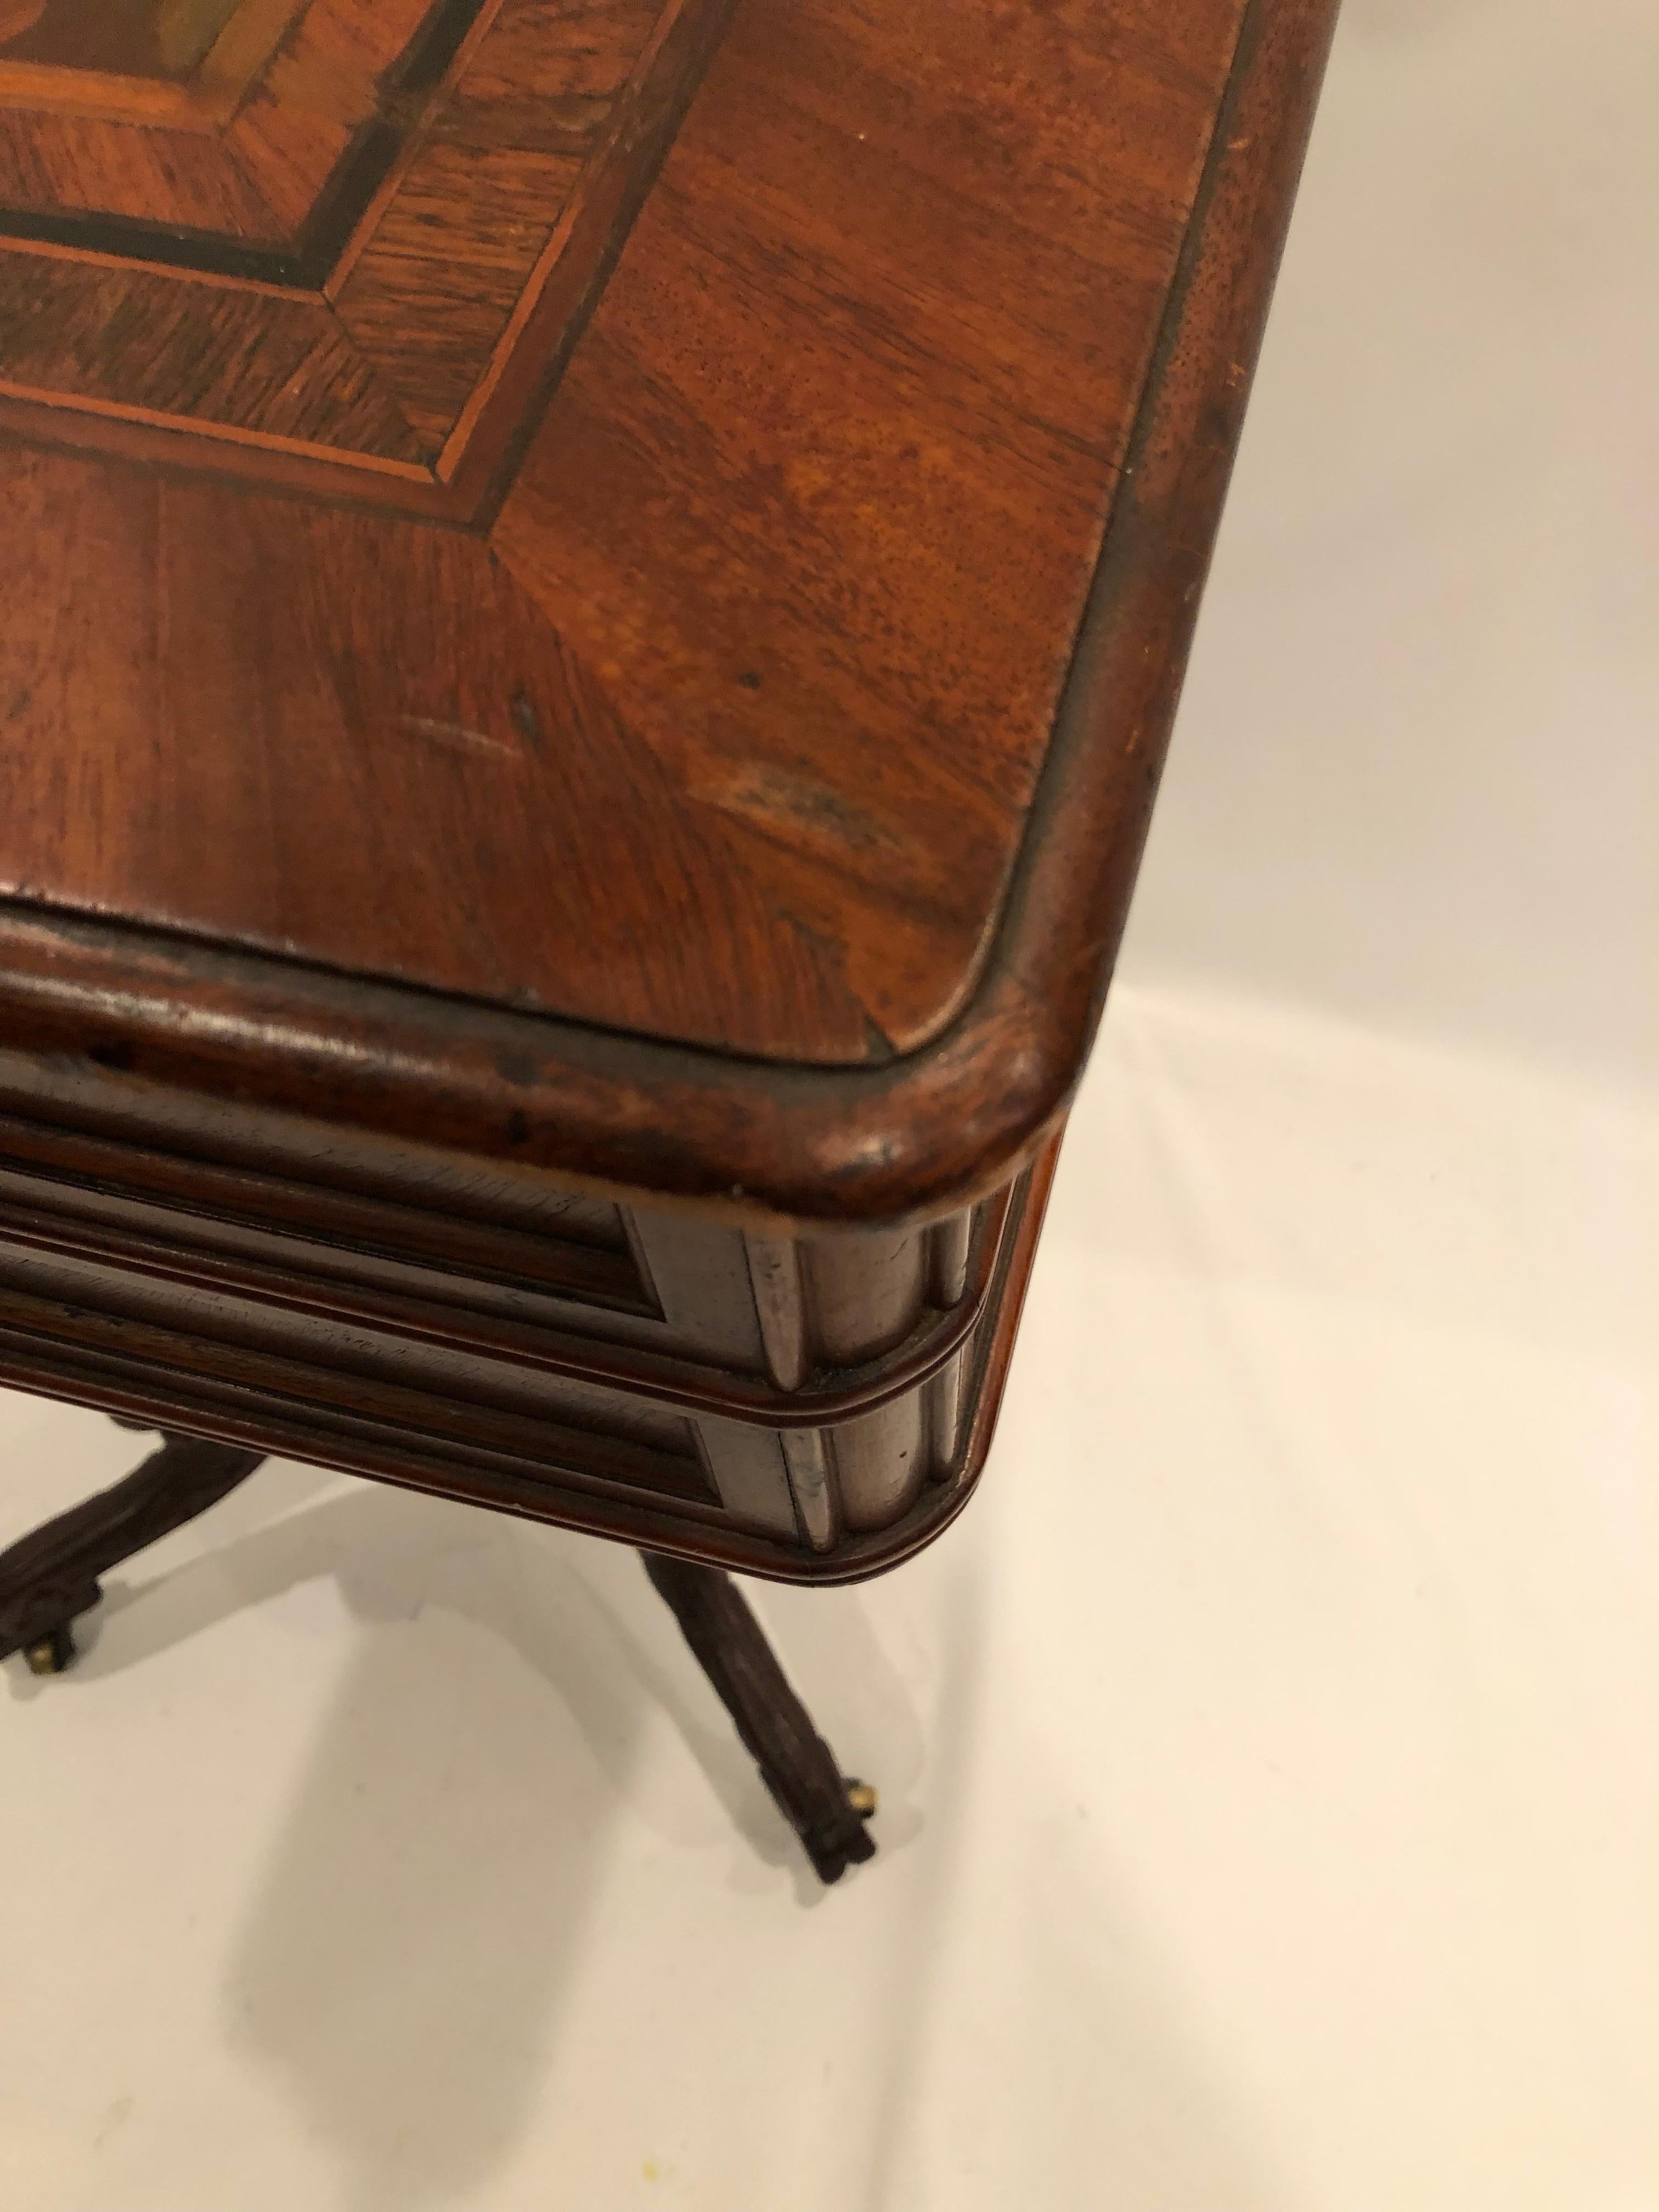 Inlay Incredible Antique Victorian Sewing Stand End Table For Sale